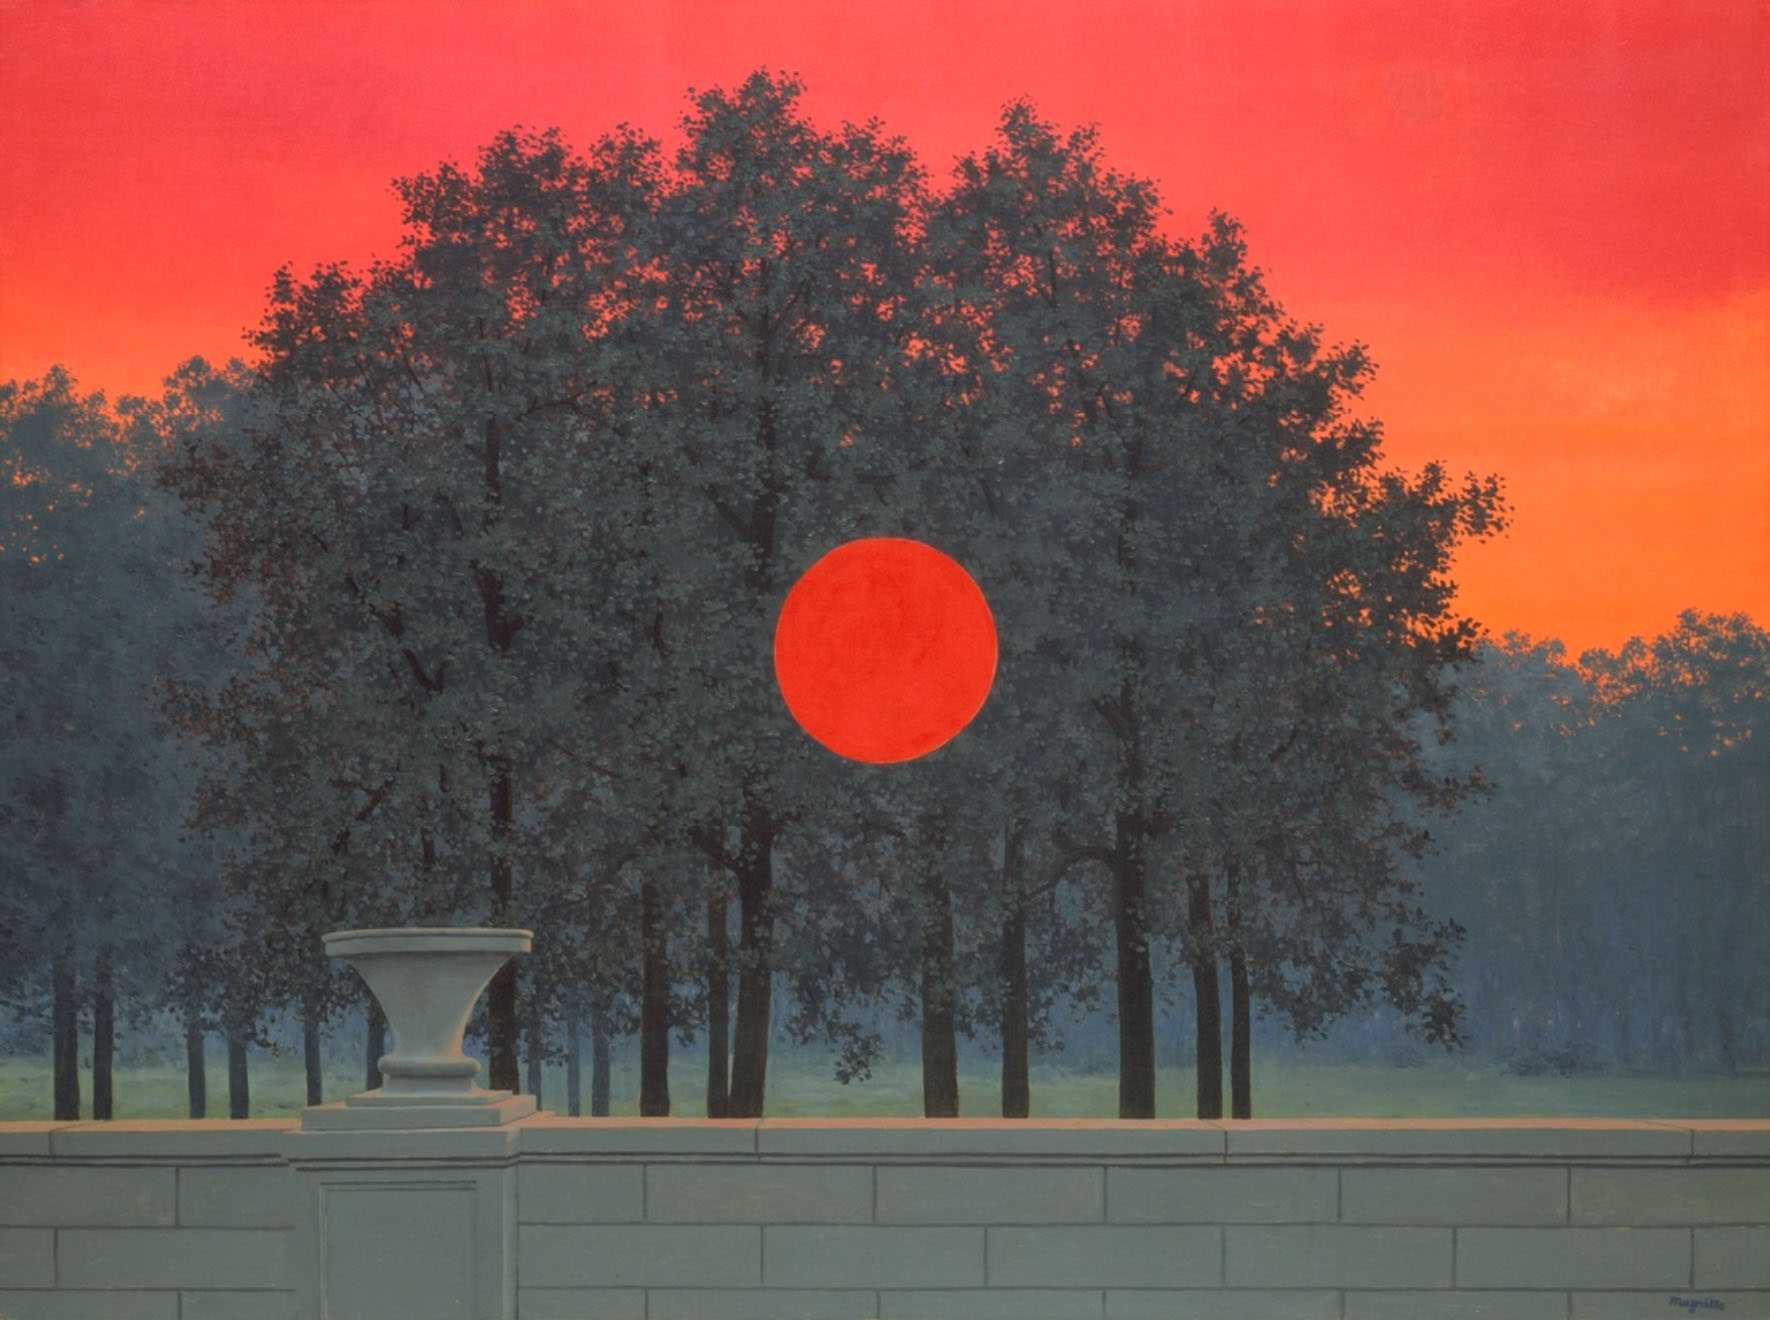 Find out more about Rene Magritte - The Banquet